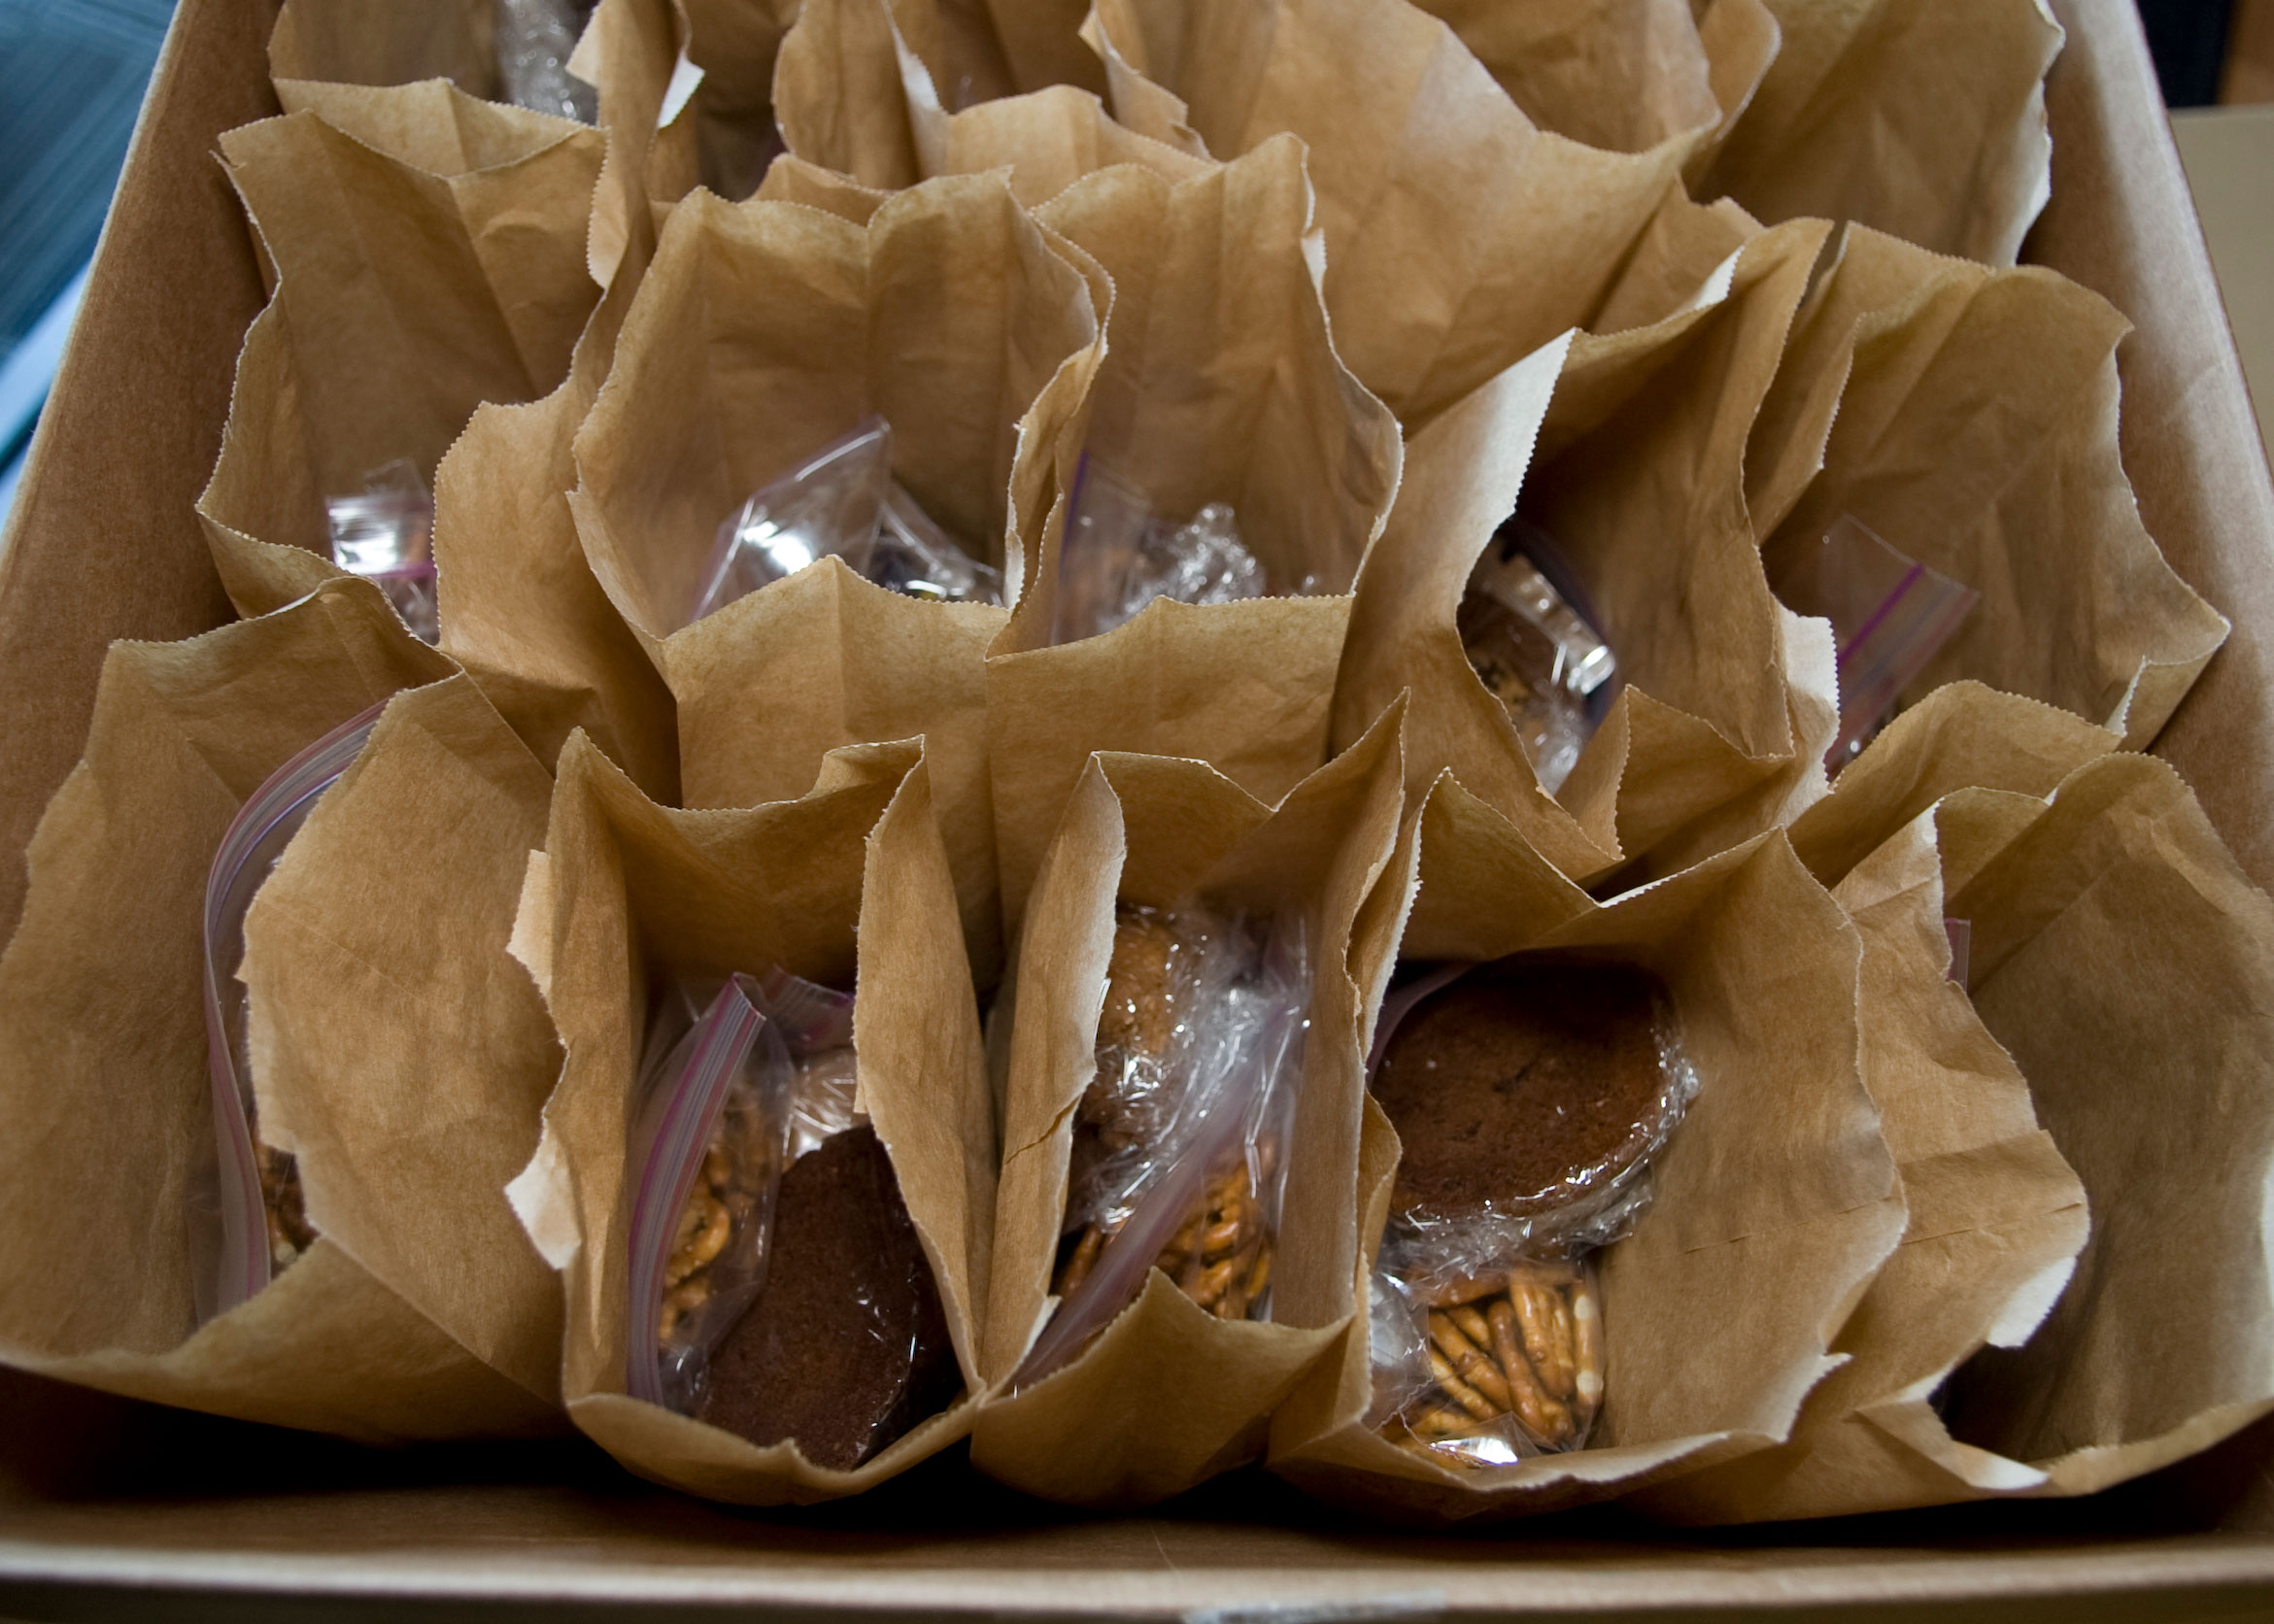 A box filled with sack lunches available for children to take home.